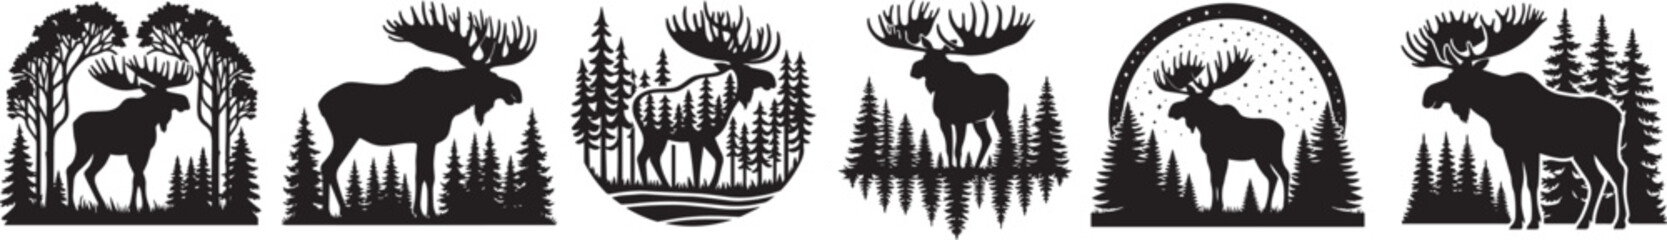 moose against a forest background, large set of trees and nature, black vector graphic